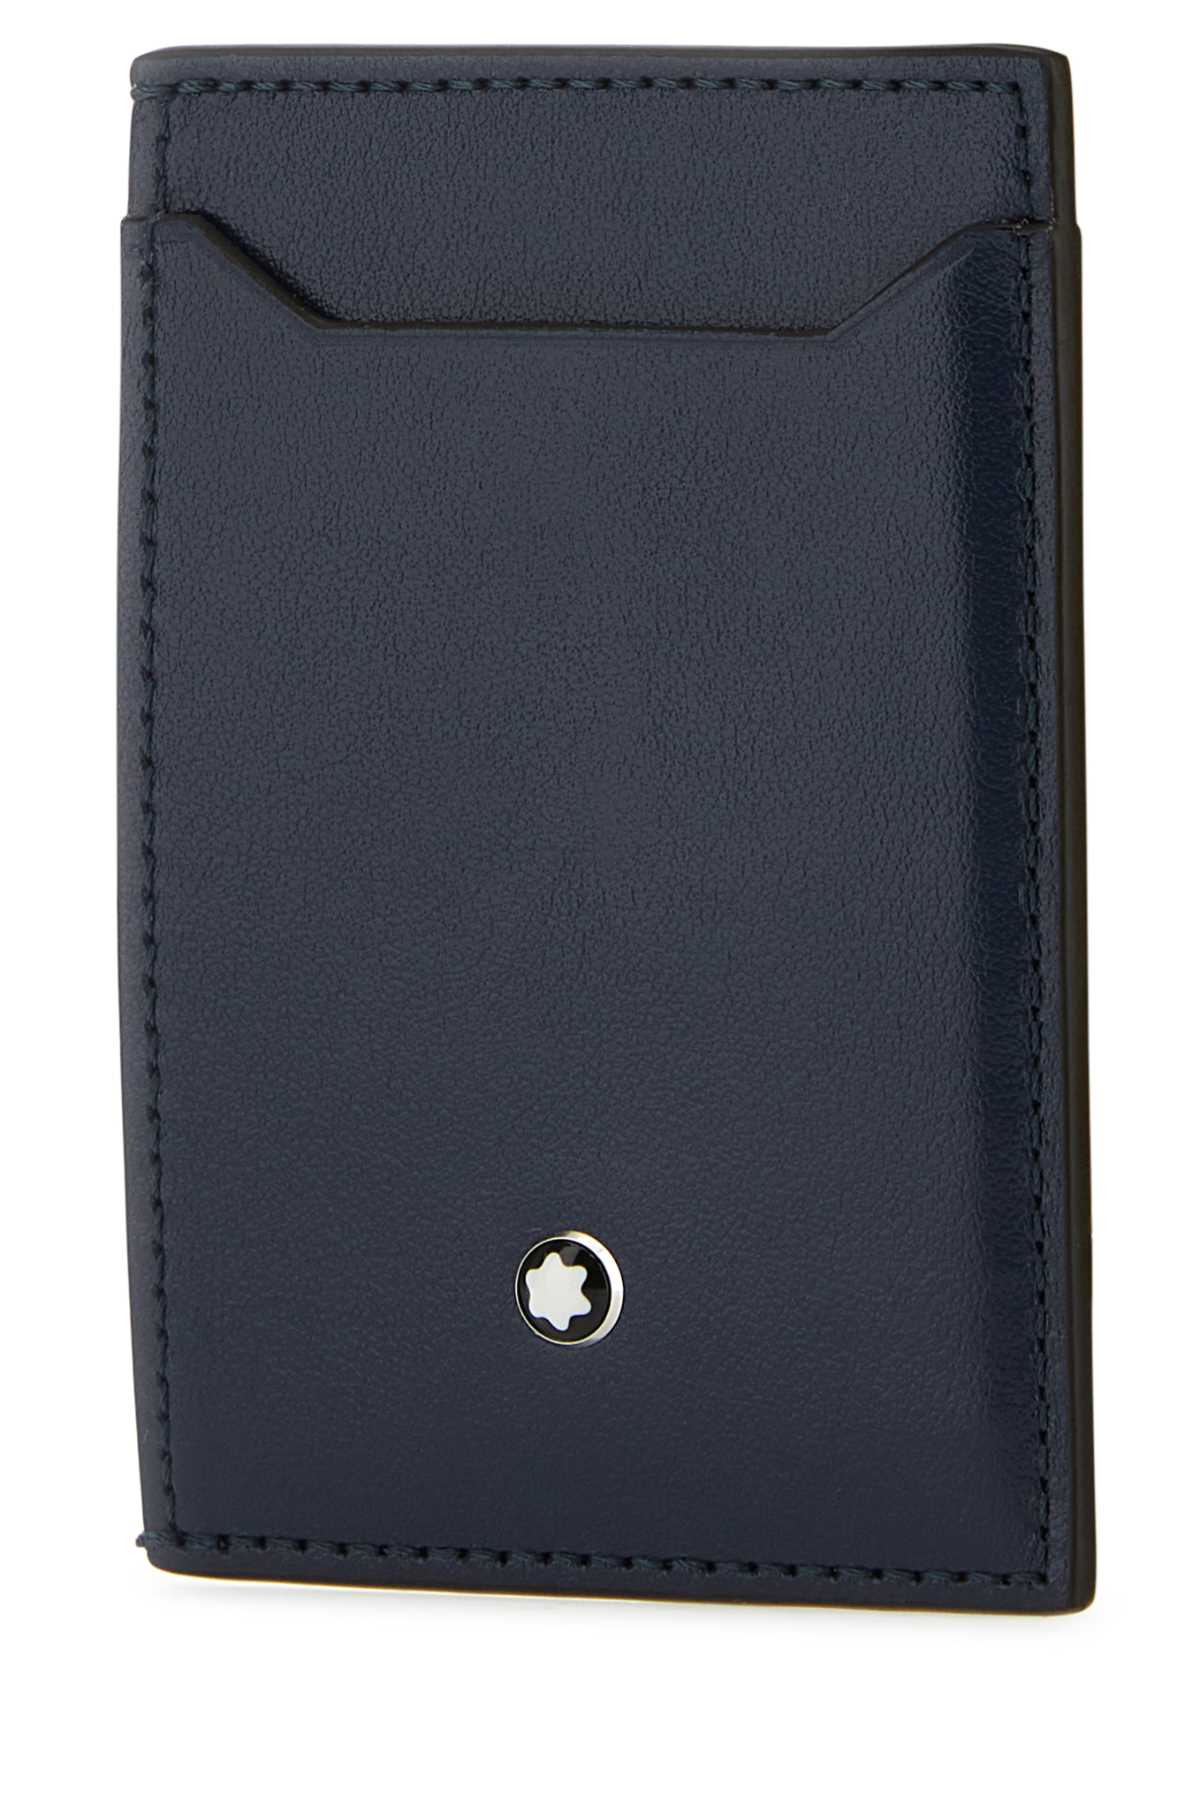 Montblanc Blue Leather Cardholder In Inkblue